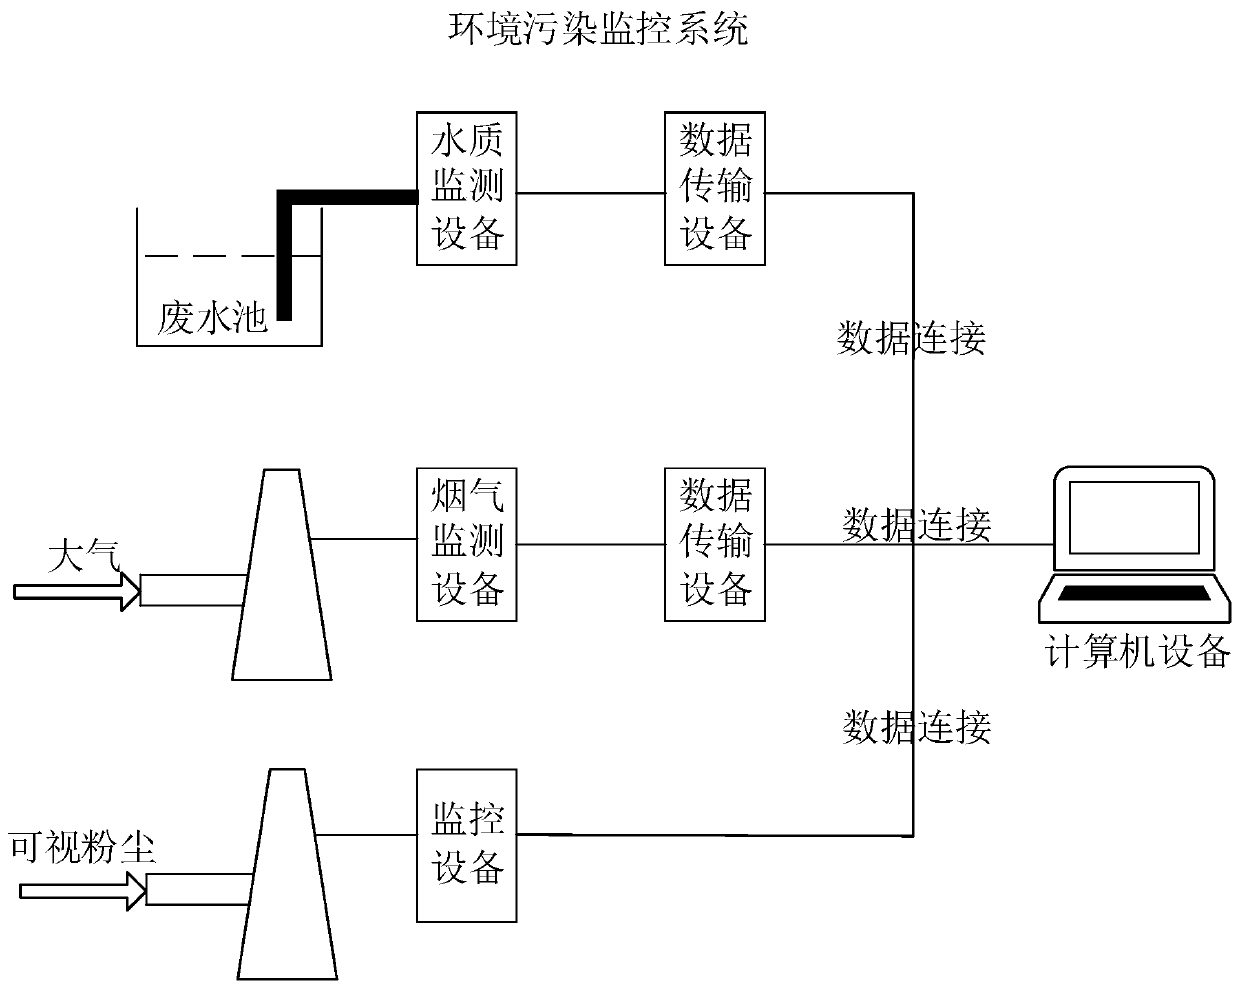 Environment pollution monitoring system and method